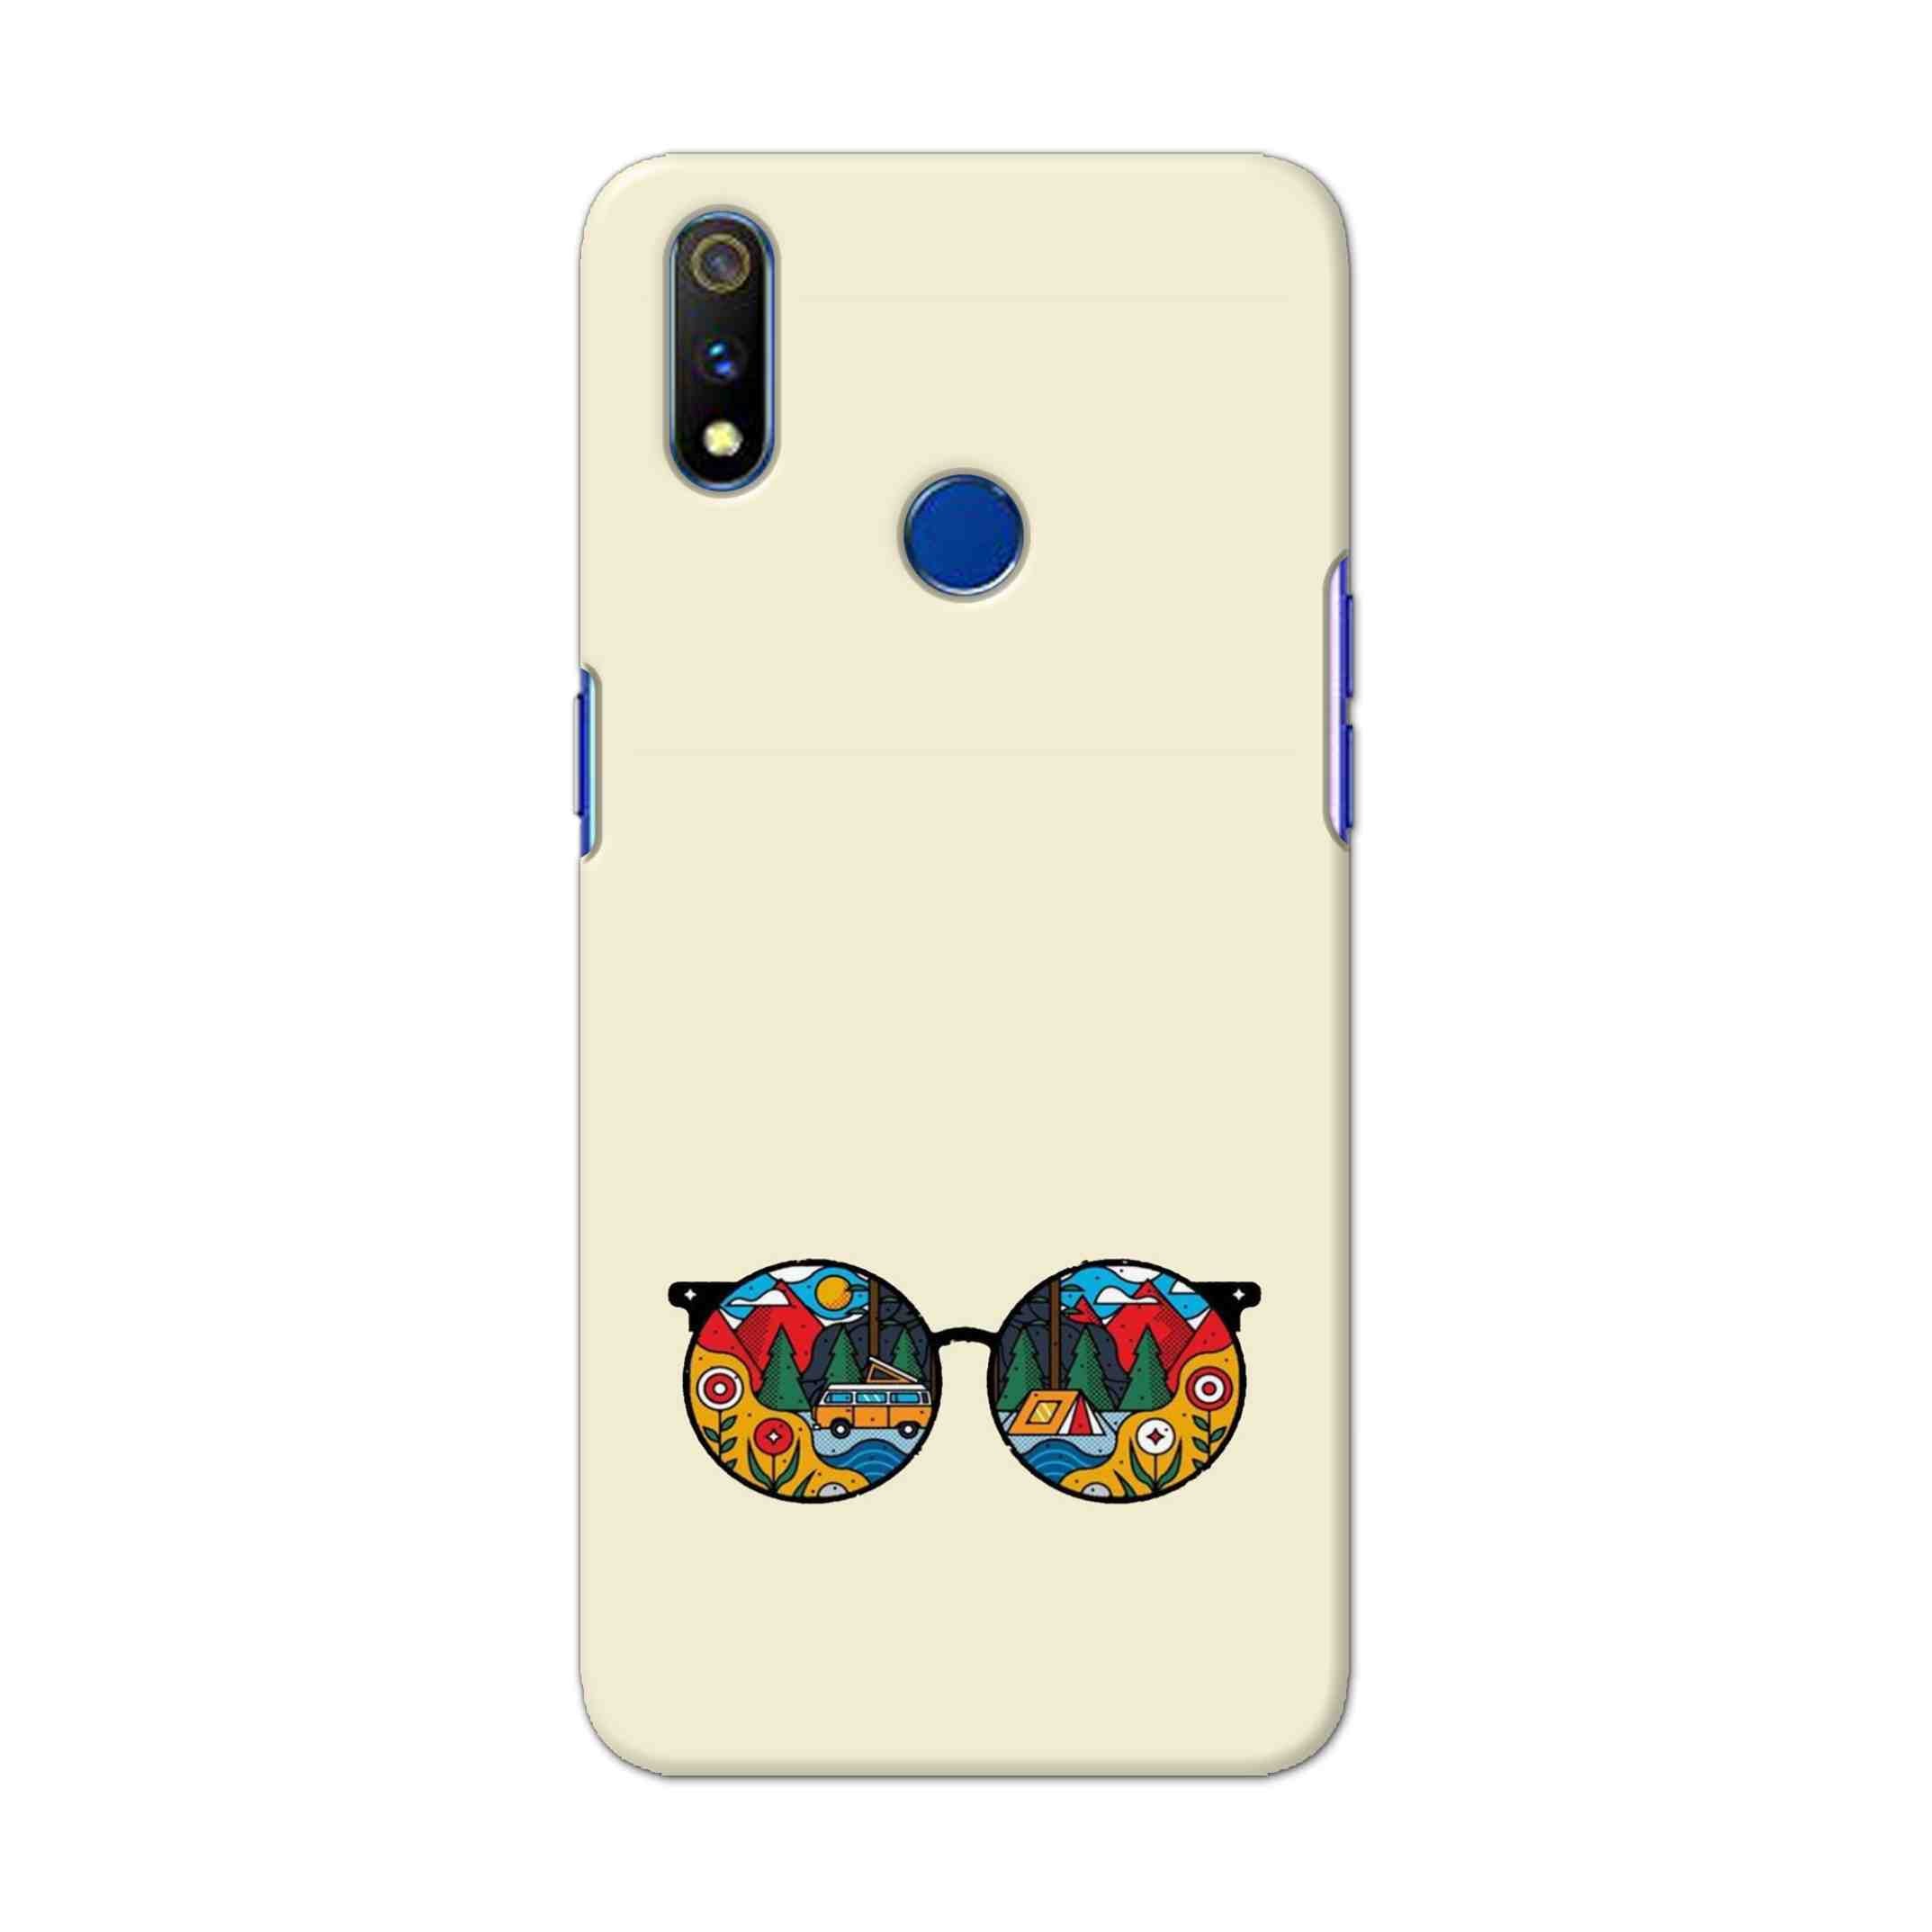 Buy Rainbow Sunglasses Hard Back Mobile Phone Case Cover For Realme 3 Pro Online